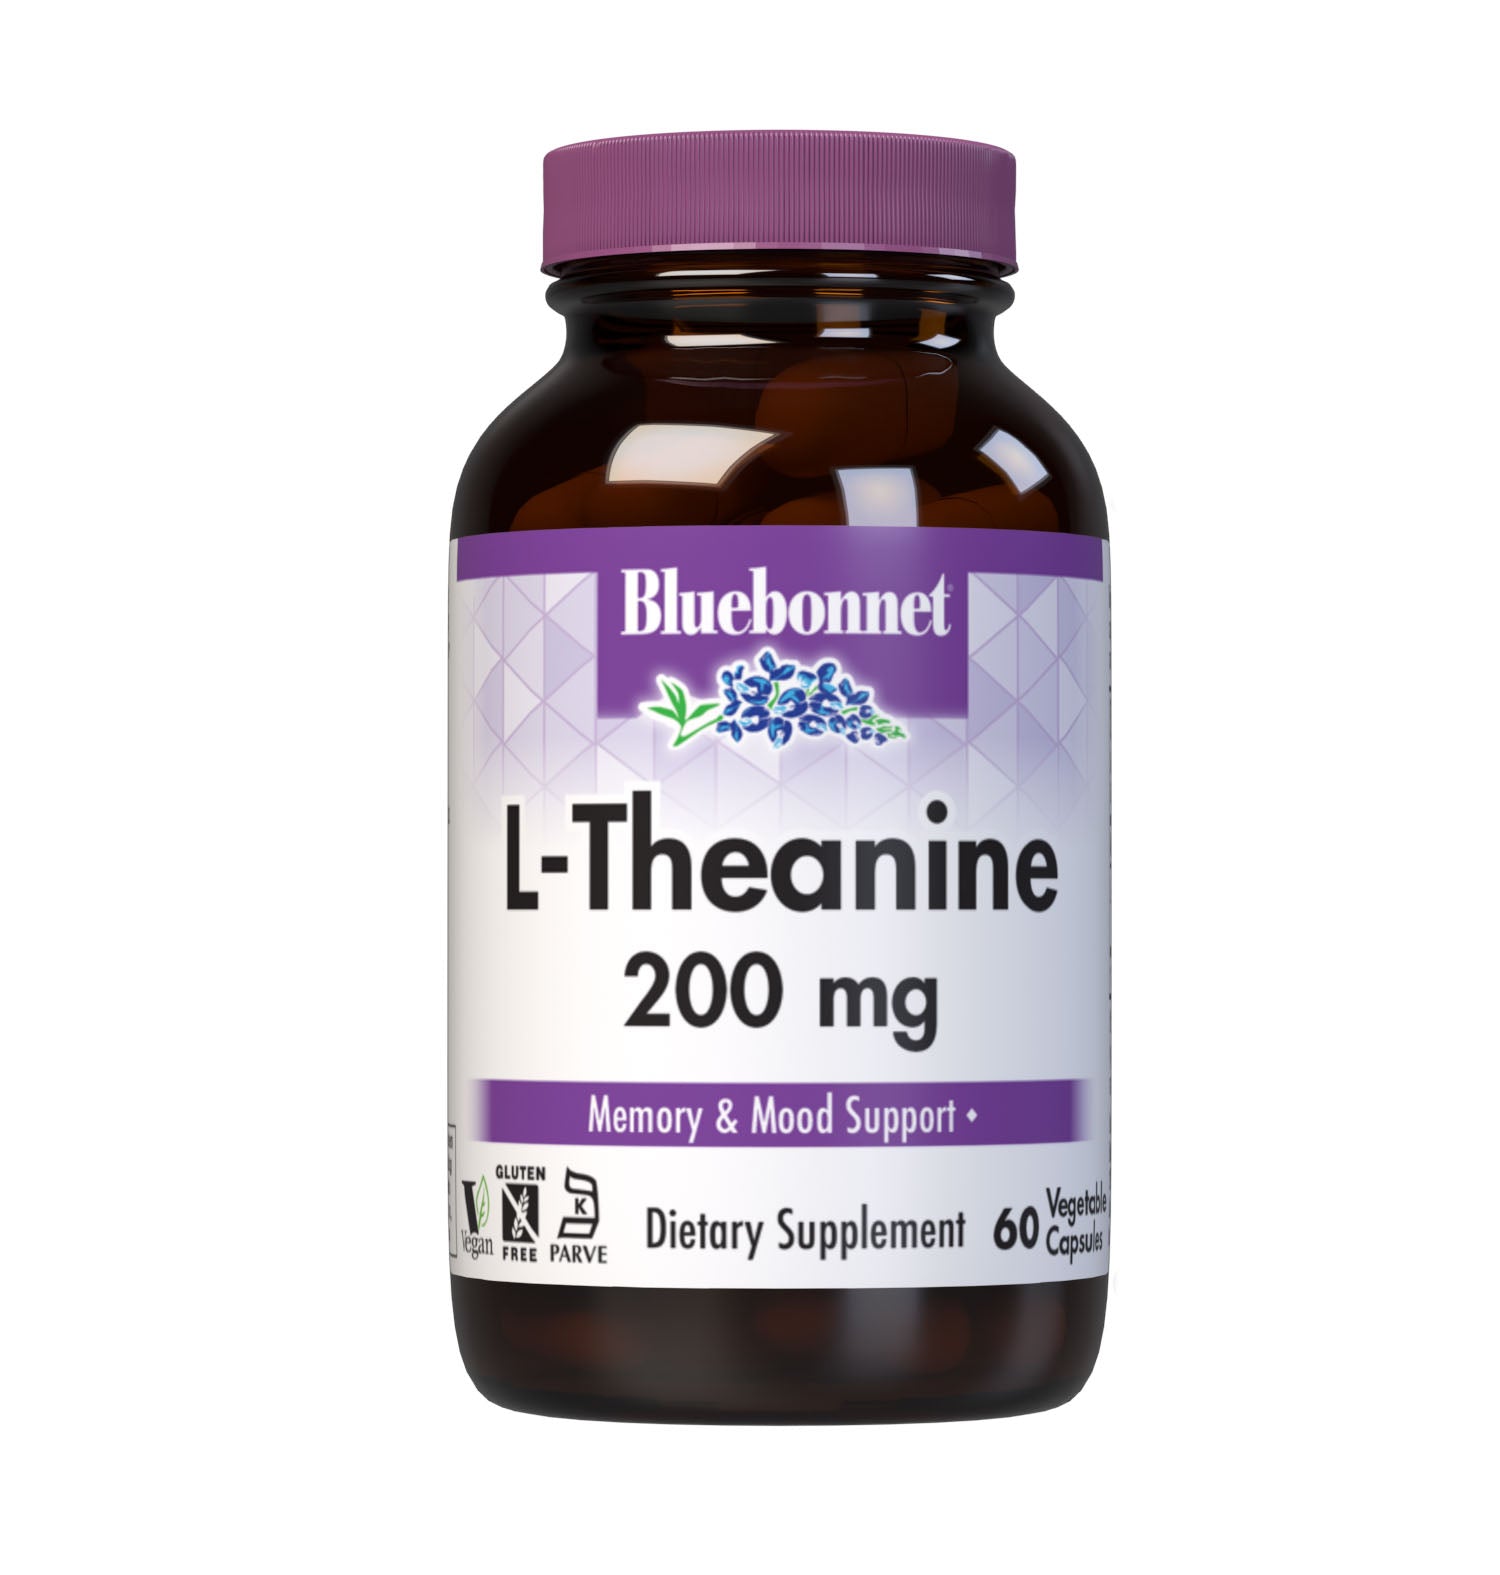 Bluebonnet L-Theanine 200 mg 60 Vegetable Capsules are formulated with the free-form amino acid L-theanine in its crystalline form, which may improve memory and learning as well as support an overall sense of relaxation. #size_60 count